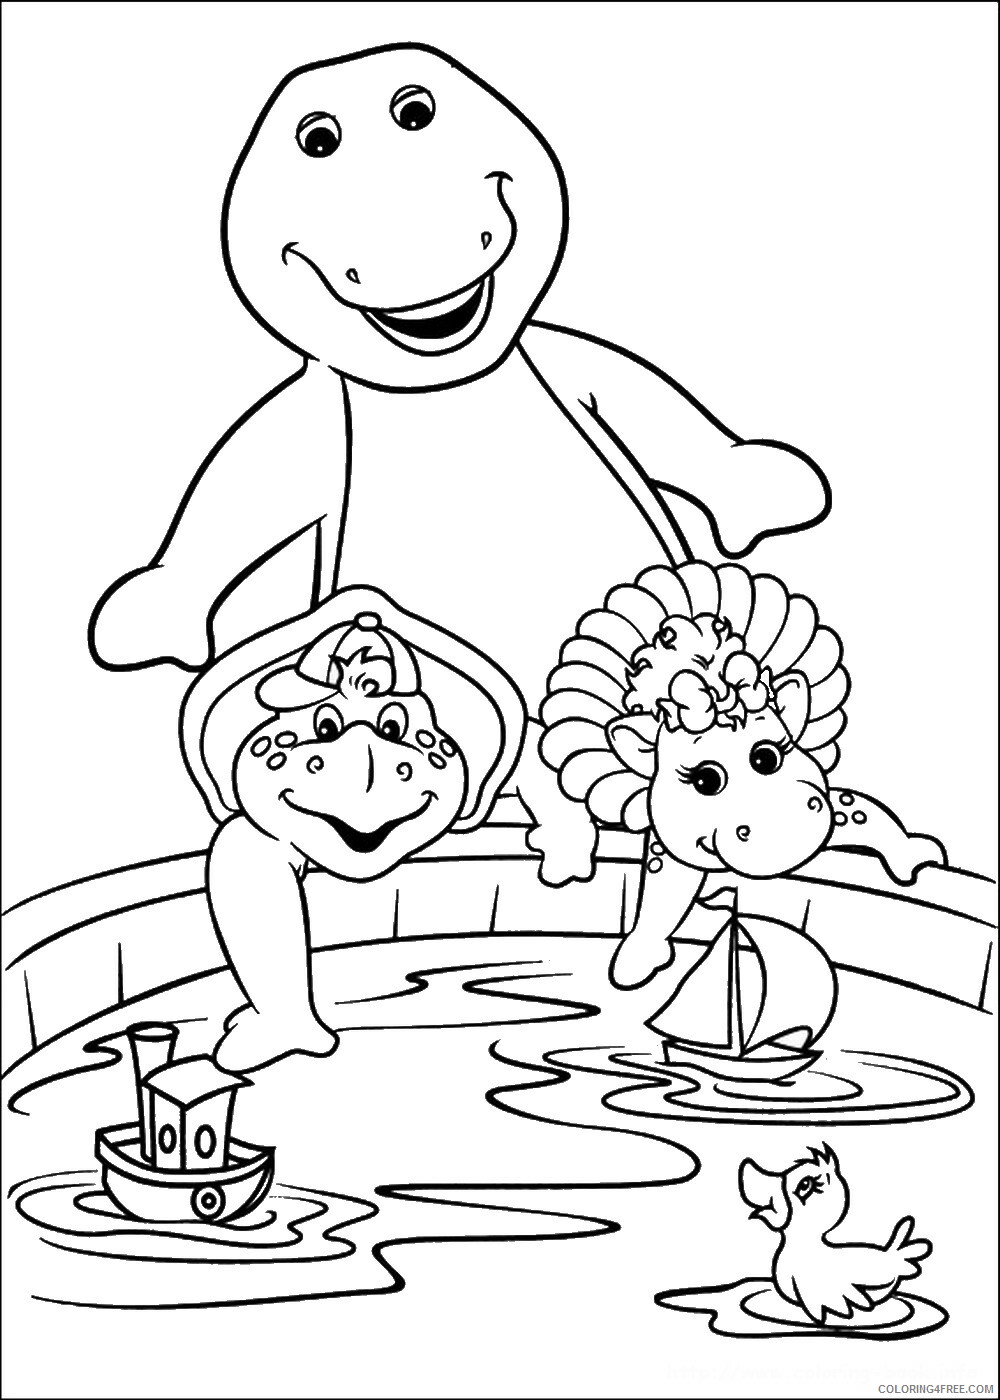 Barney and Friends Coloring Pages TV Film barney_cl_1030 Printable 2020 00603 Coloring4free